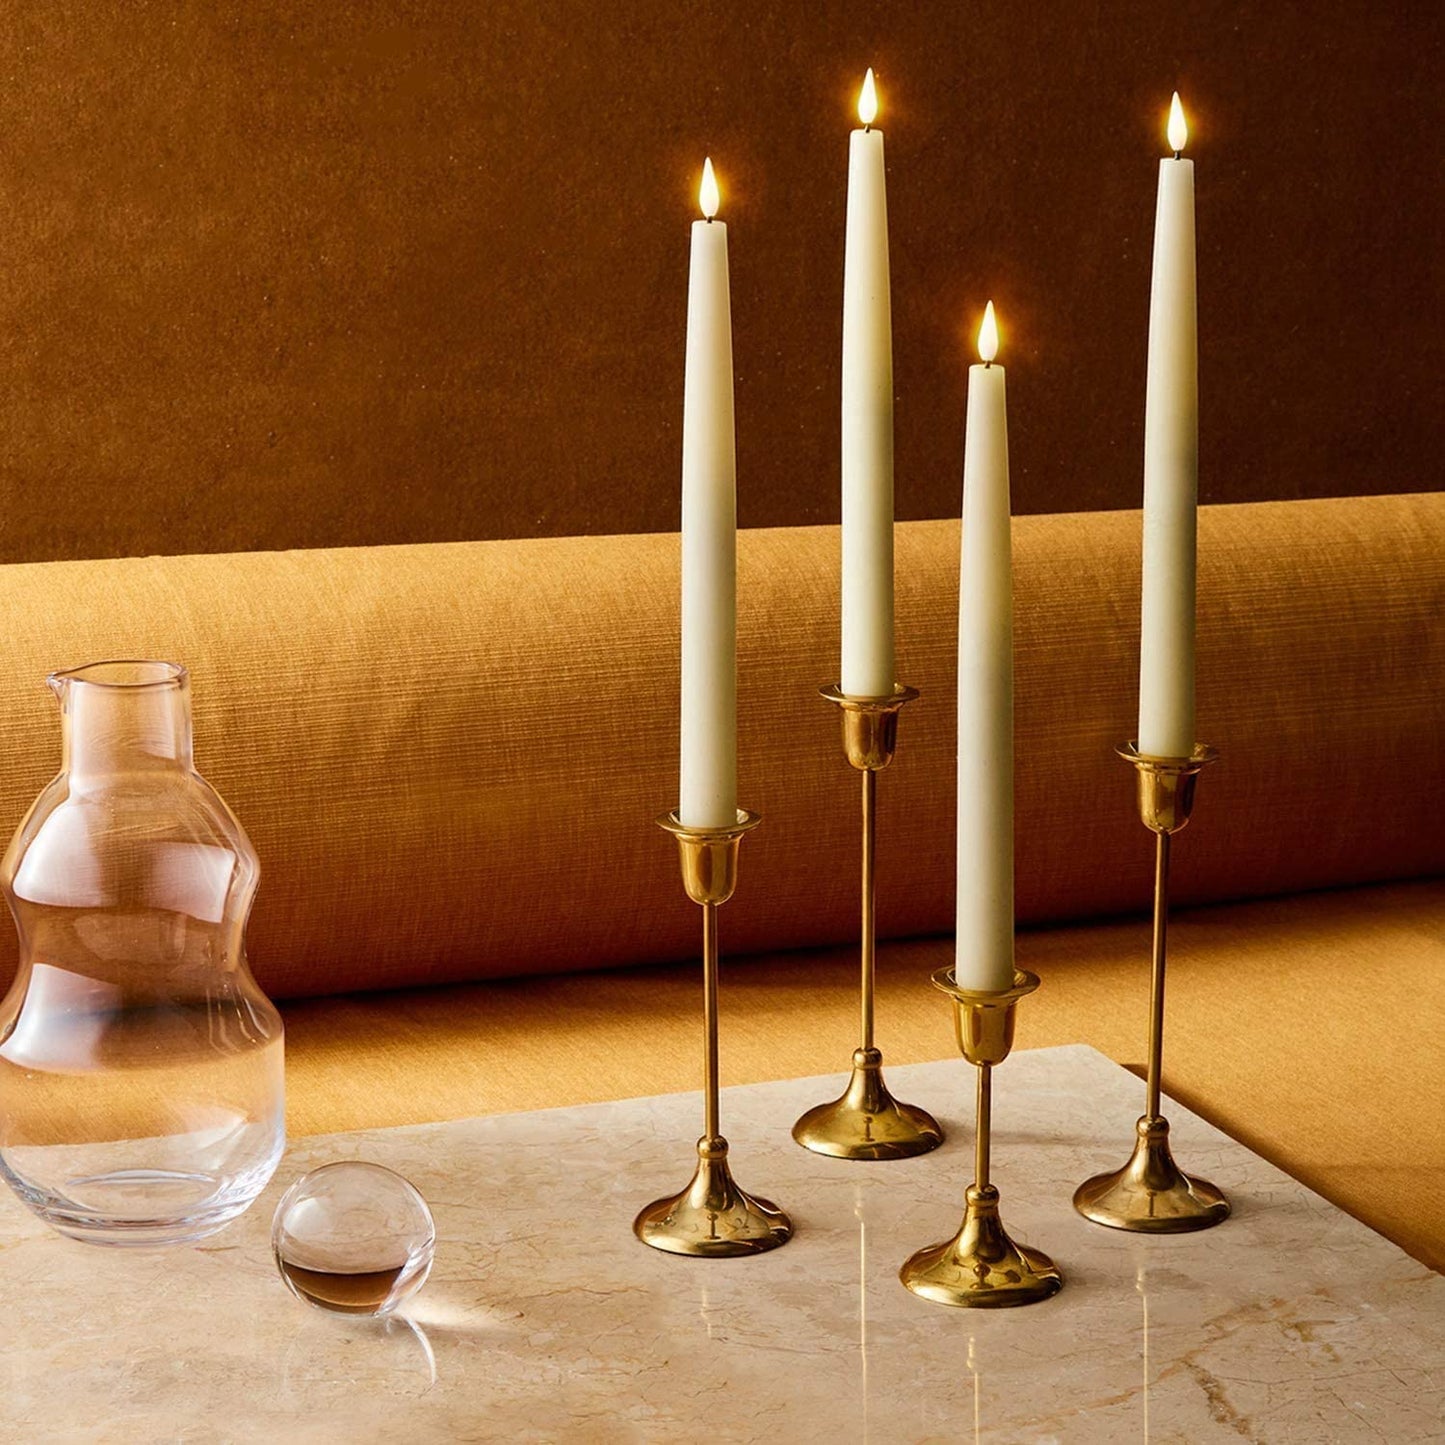 Flameless Taper Candles with Remote - 11 Inch LED Candlesticks, Realistic 3D Flame with Wick, Ivory Real Wax, Spring Home Decor, Automatic Timer, Batteries Included - Set of 4